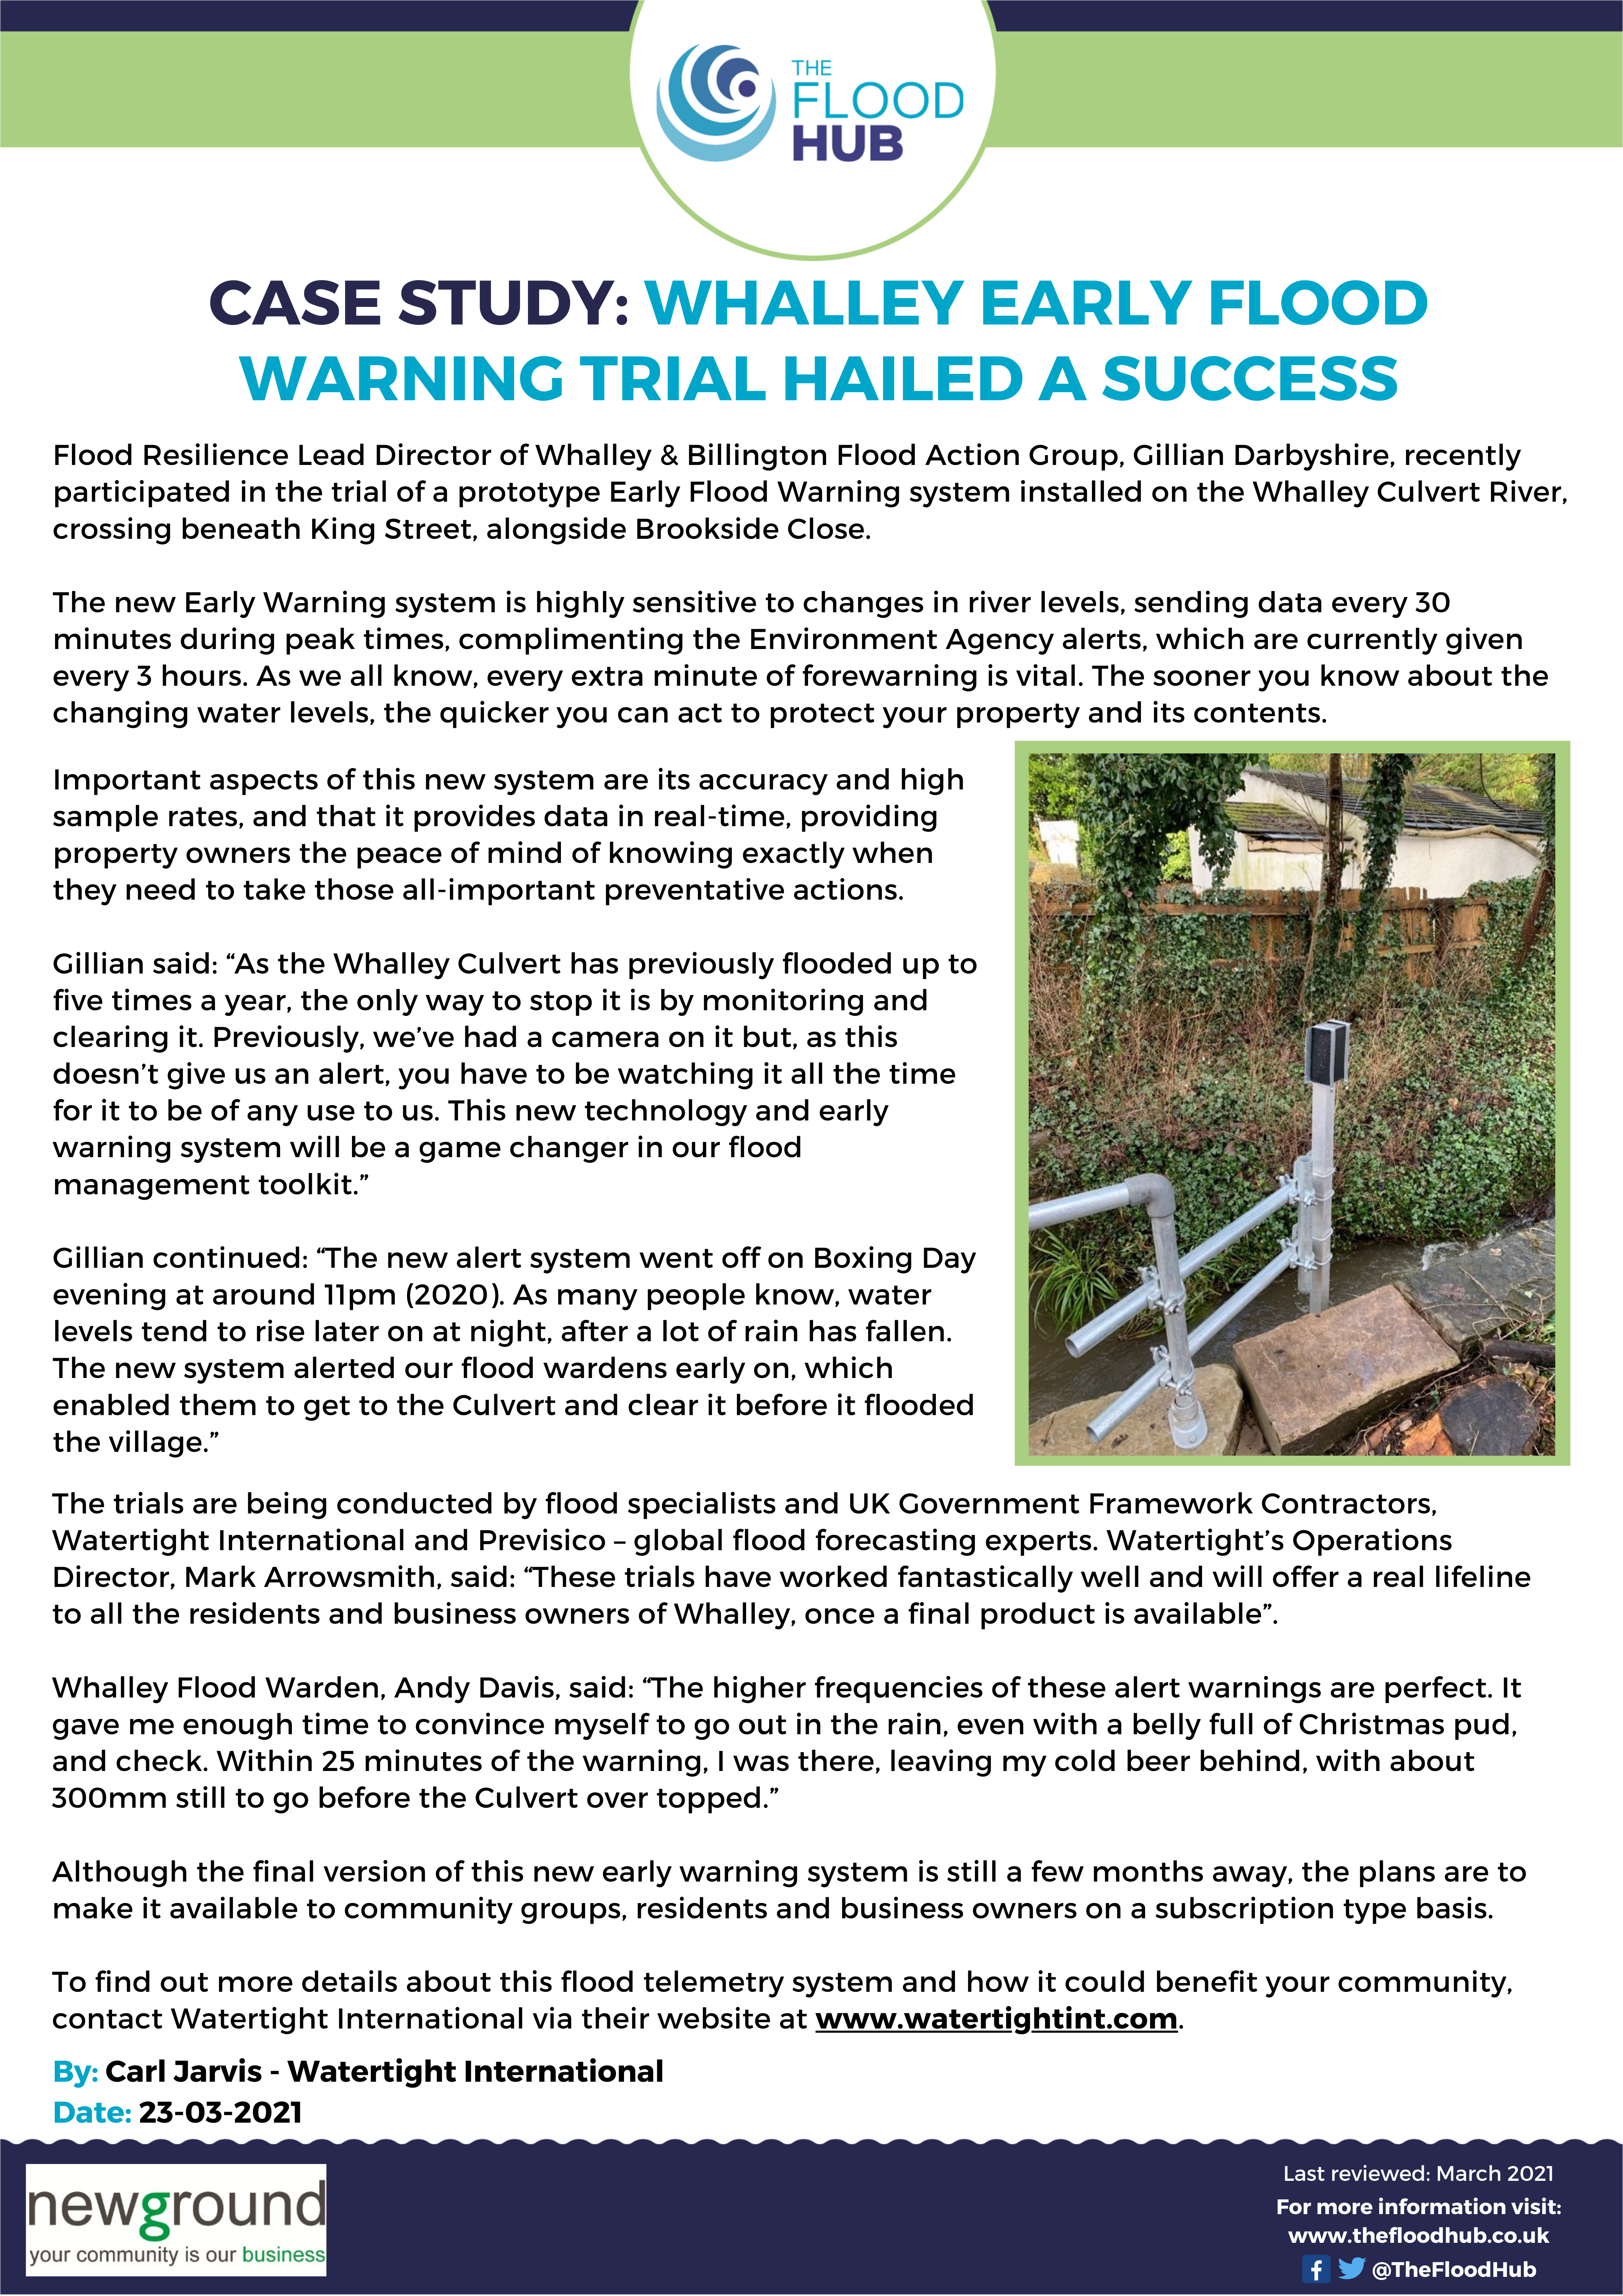 Case Study: Whalley Early Flood Warning Trial Hailed a Success